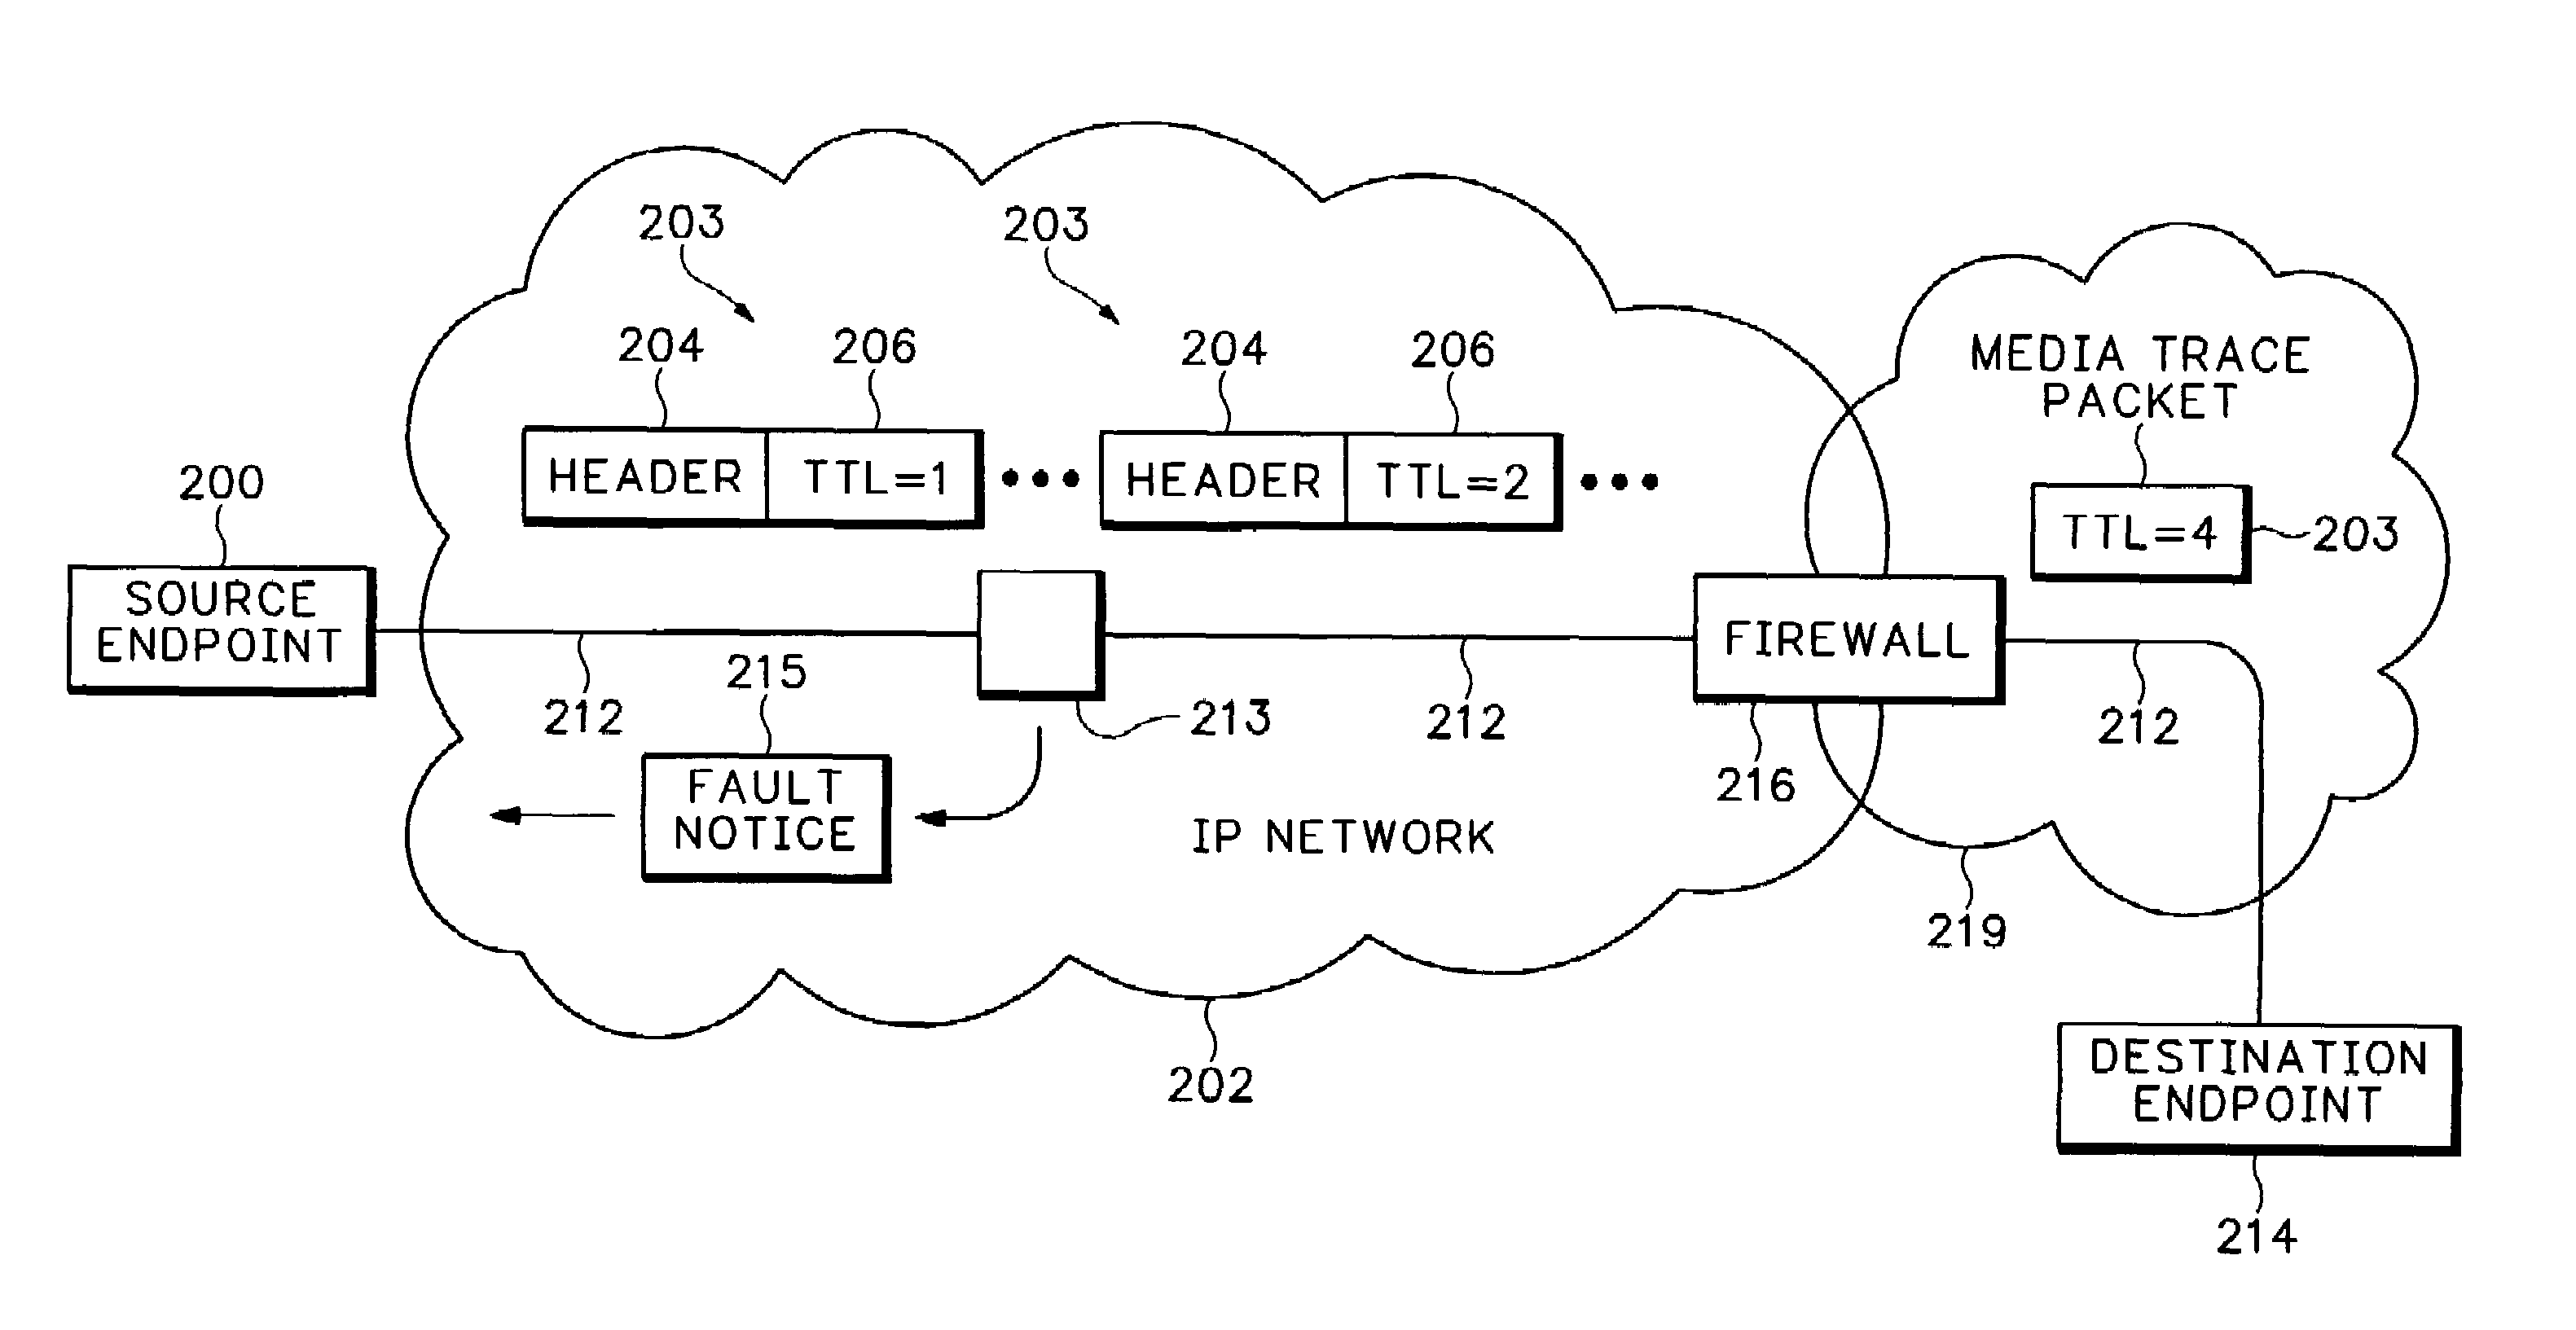 Method and apparatus for analyzing a media path for an internet protocol (IP) media session